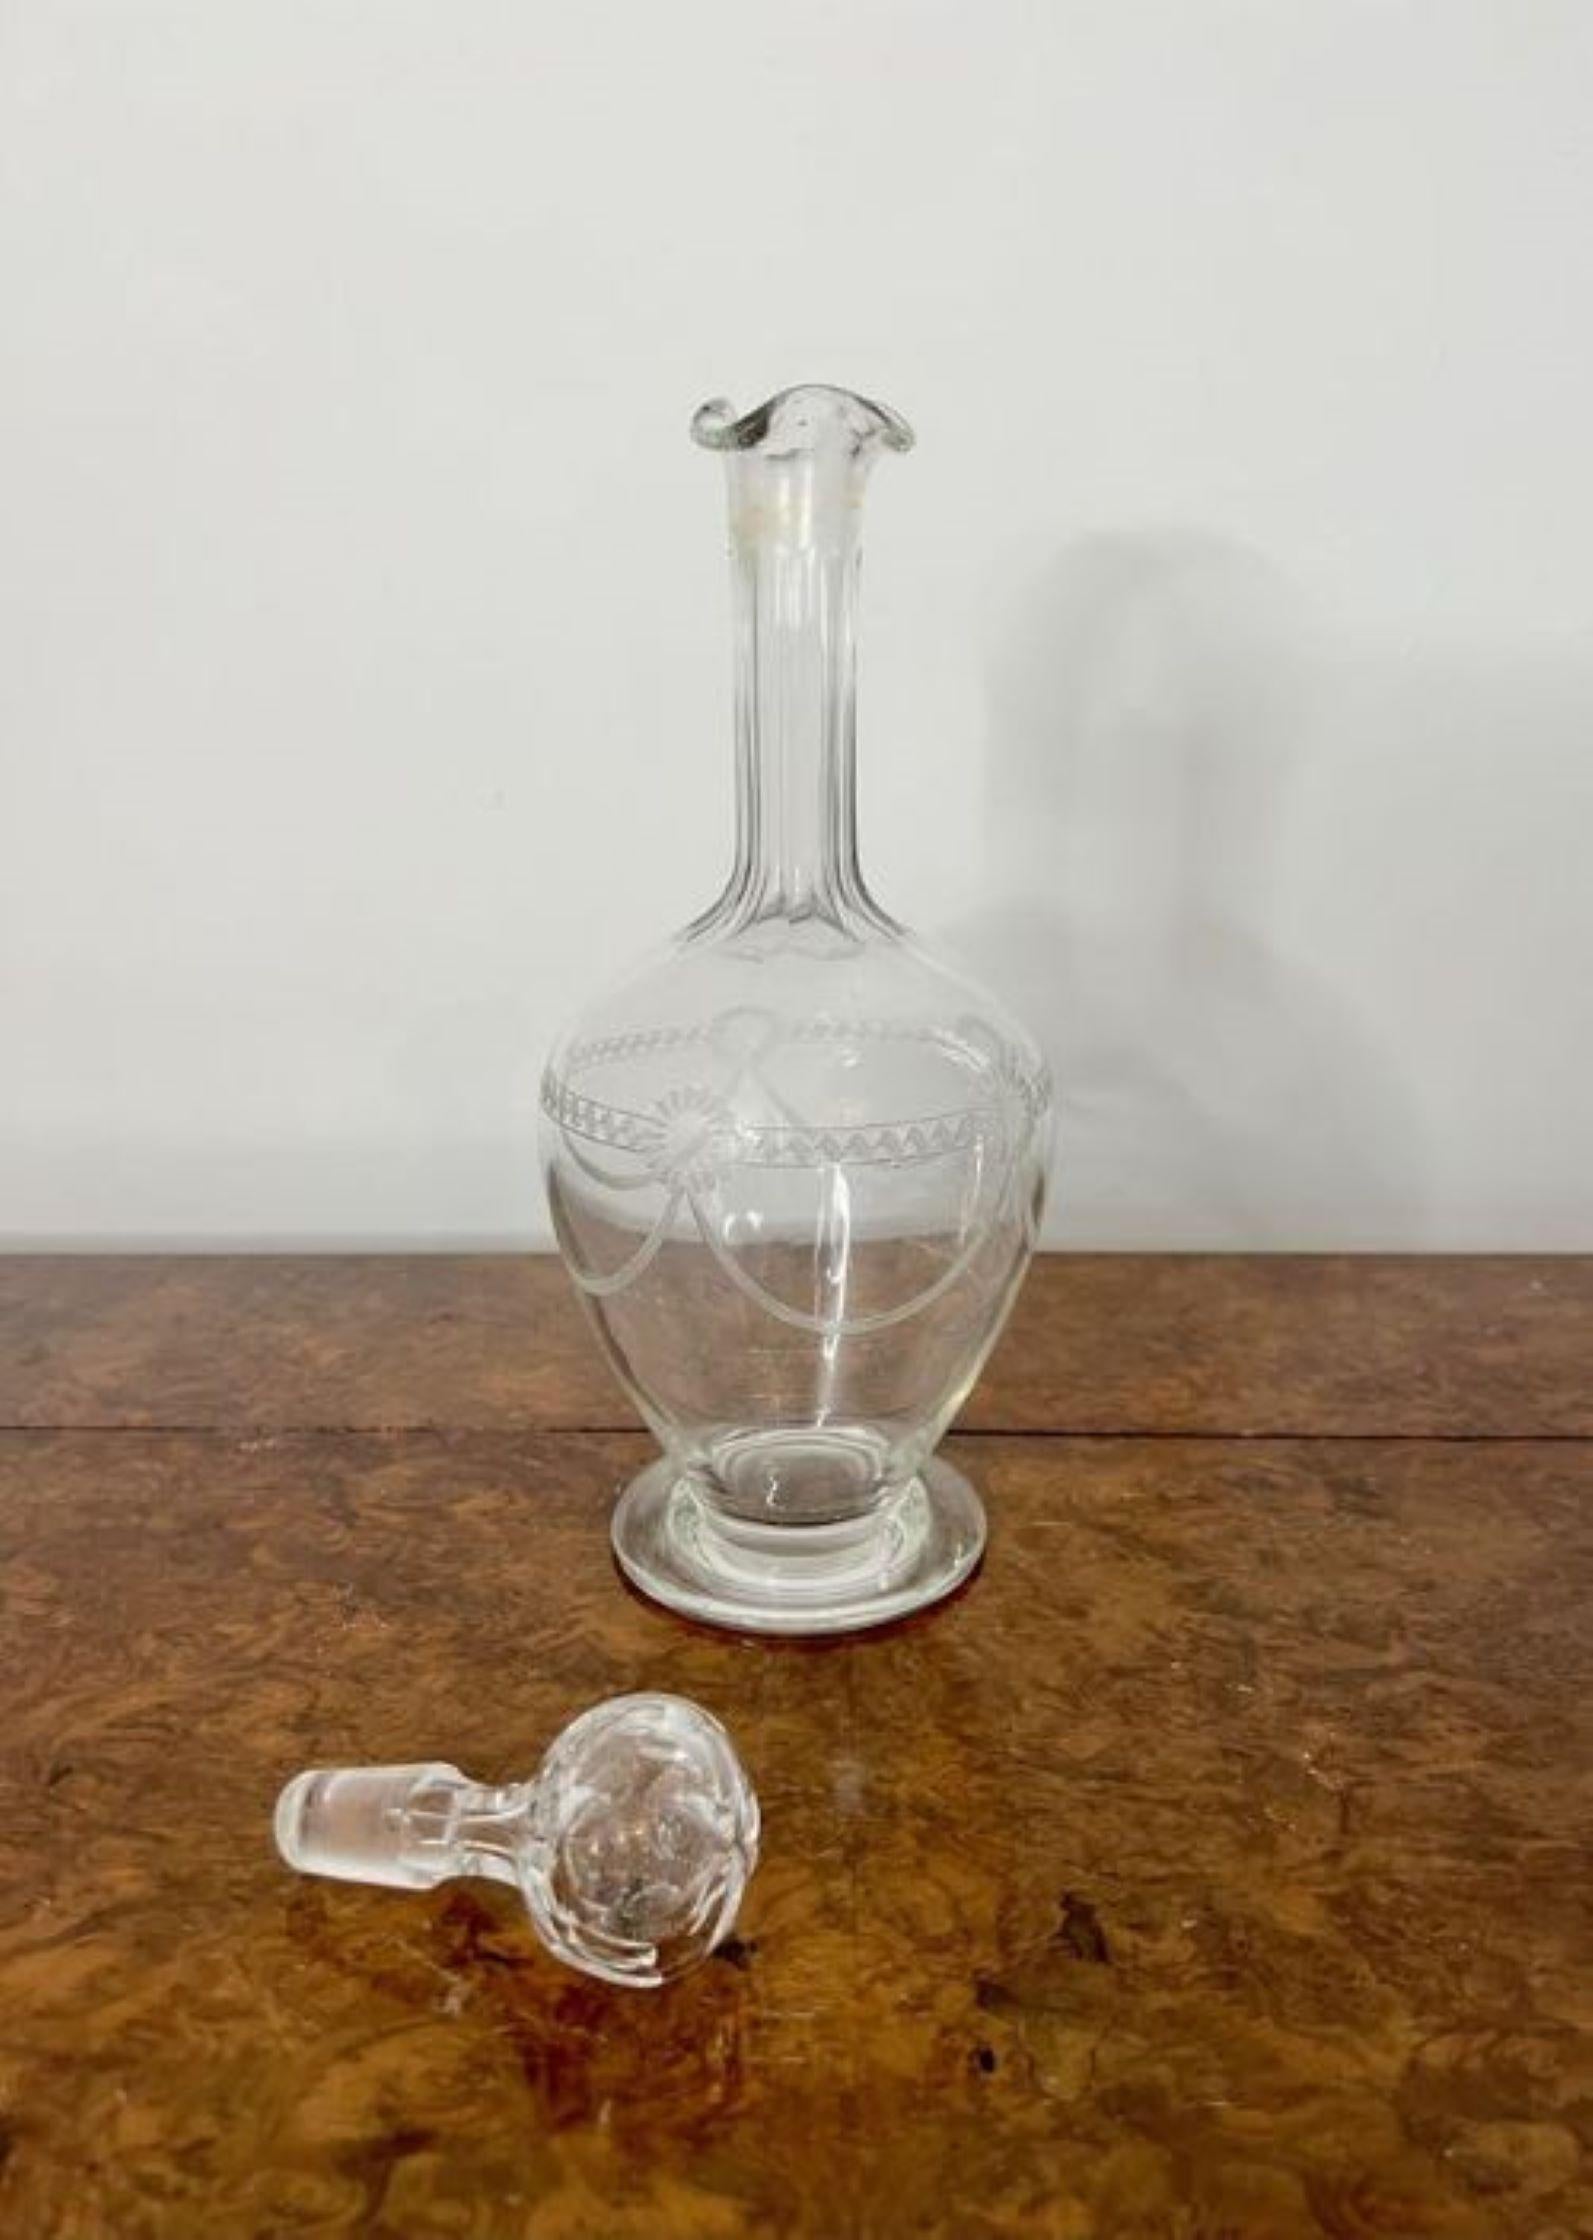 Fine quality antique Victorian decanter having an elegant antique Victorian decanter with a lovely wavy shaped top, a rounded body standing on a circular base with the original cut glass stopper. 
